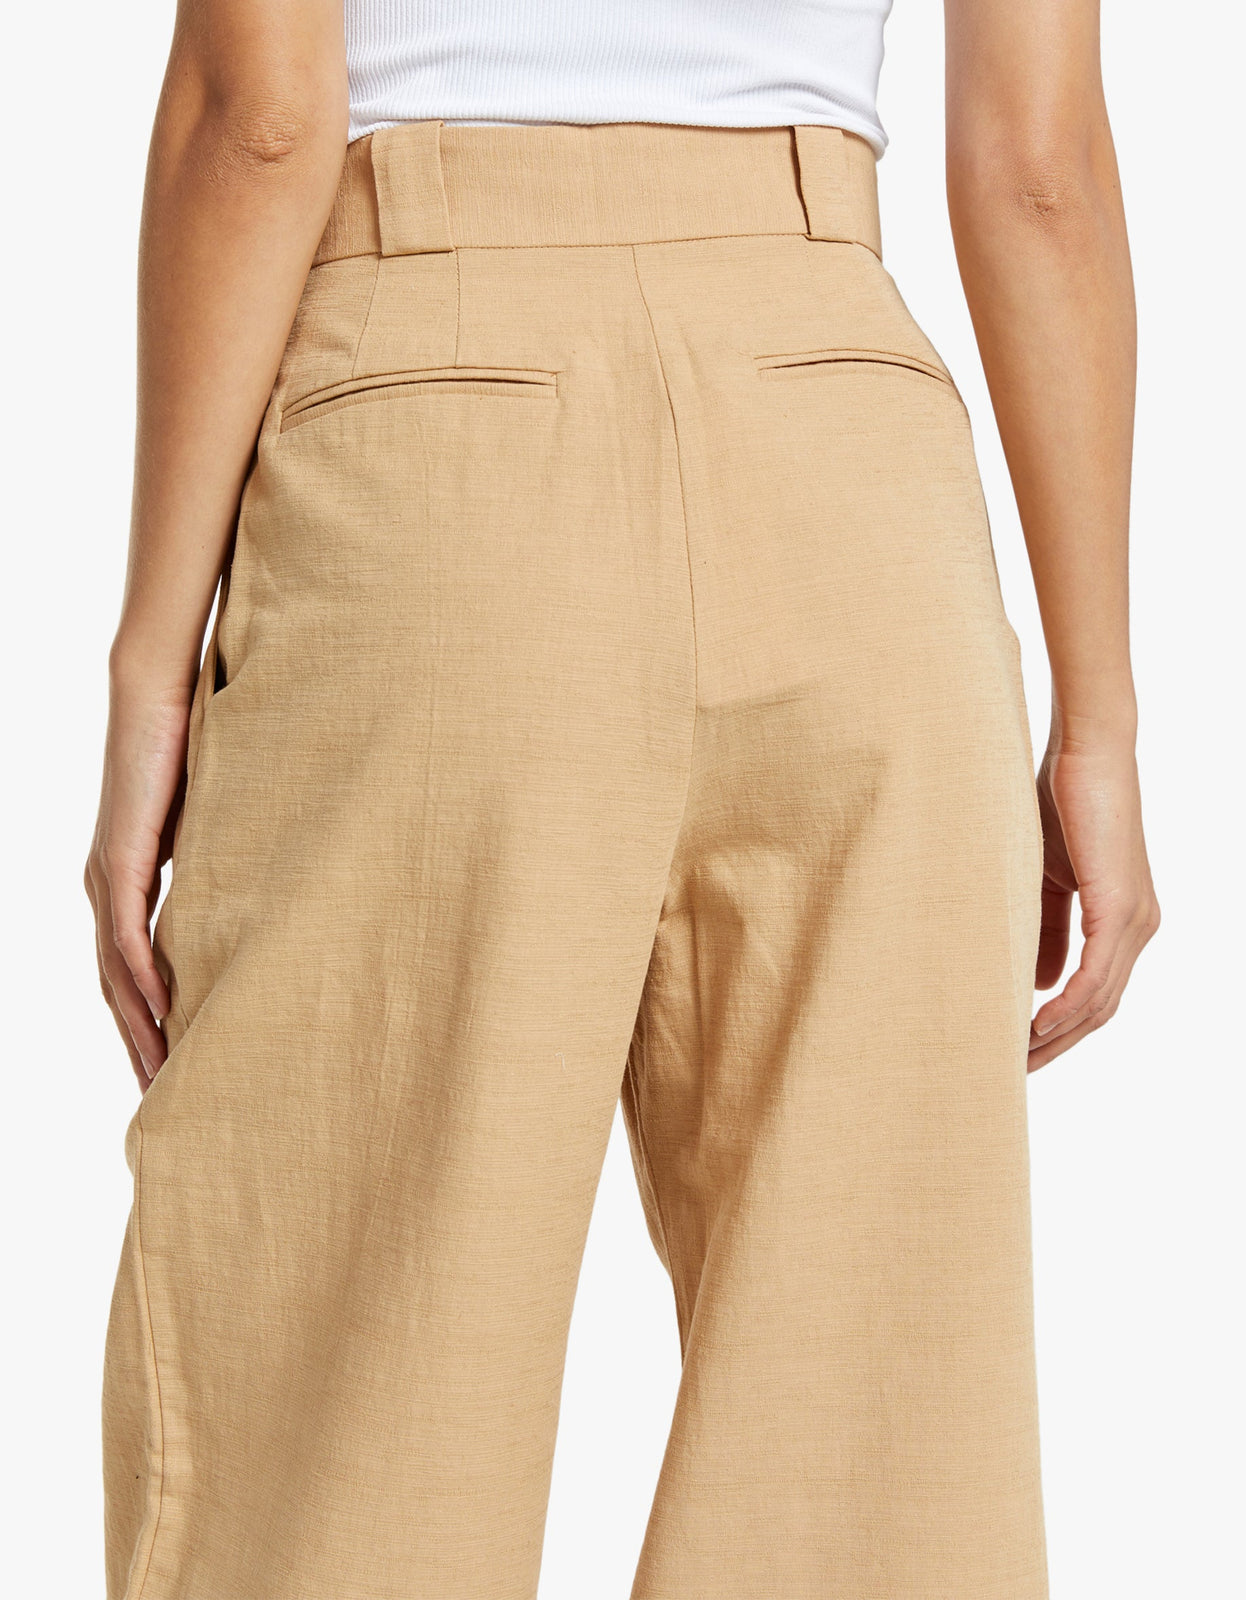 Suri Cropped Pant - High Waisted Tapered Tailored Pant With Pocket Detail  in Sand